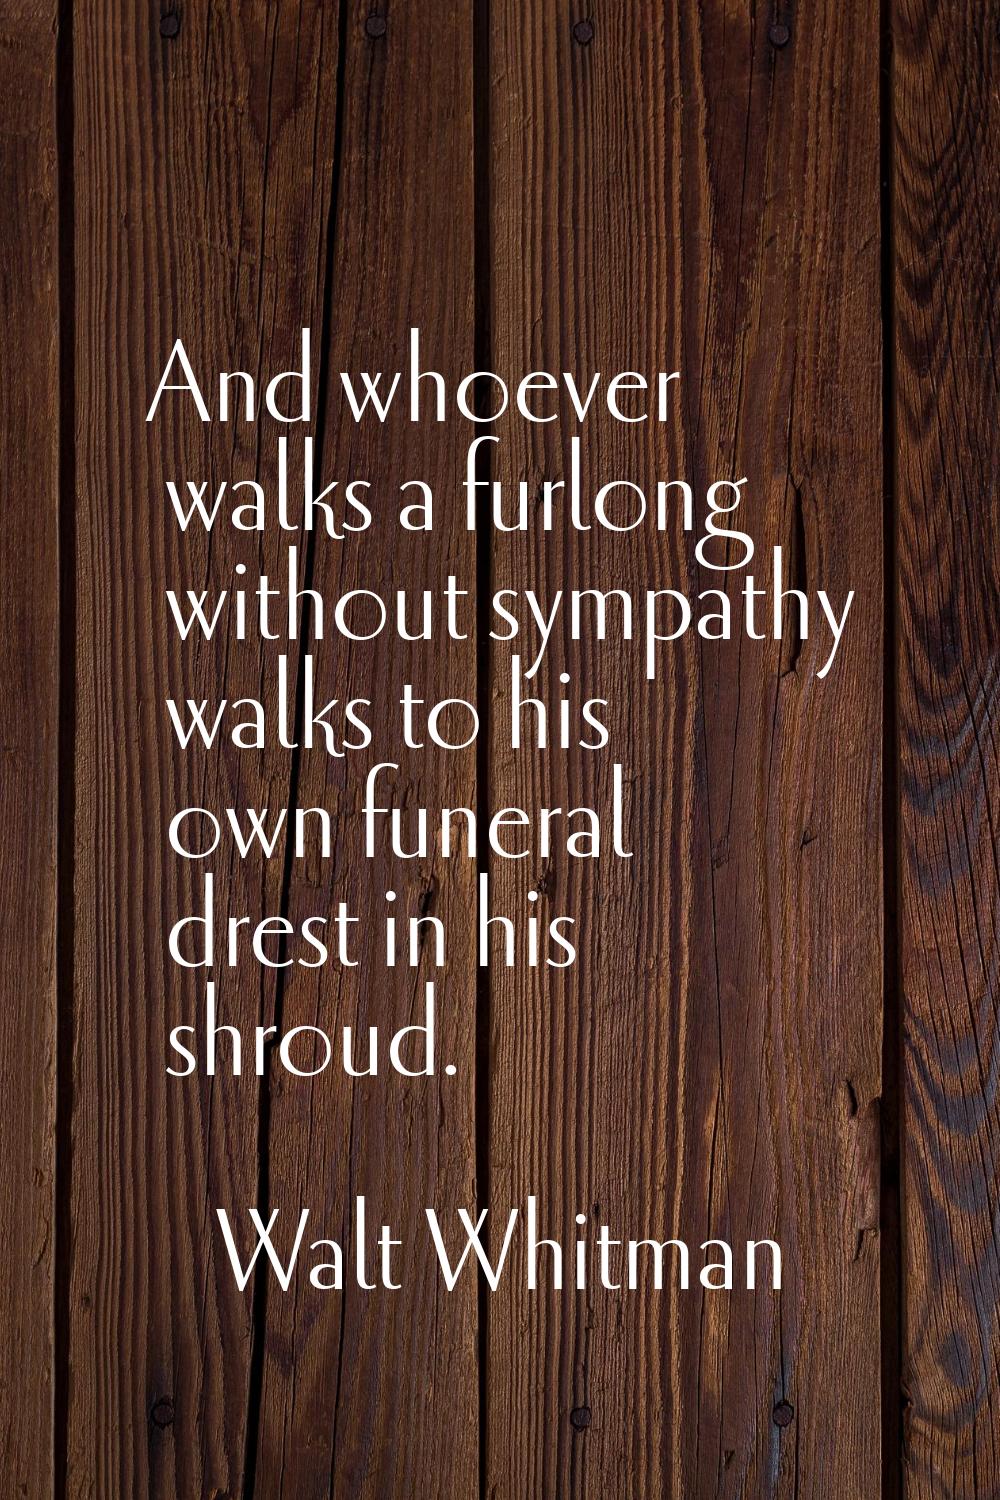 And whoever walks a furlong without sympathy walks to his own funeral drest in his shroud.